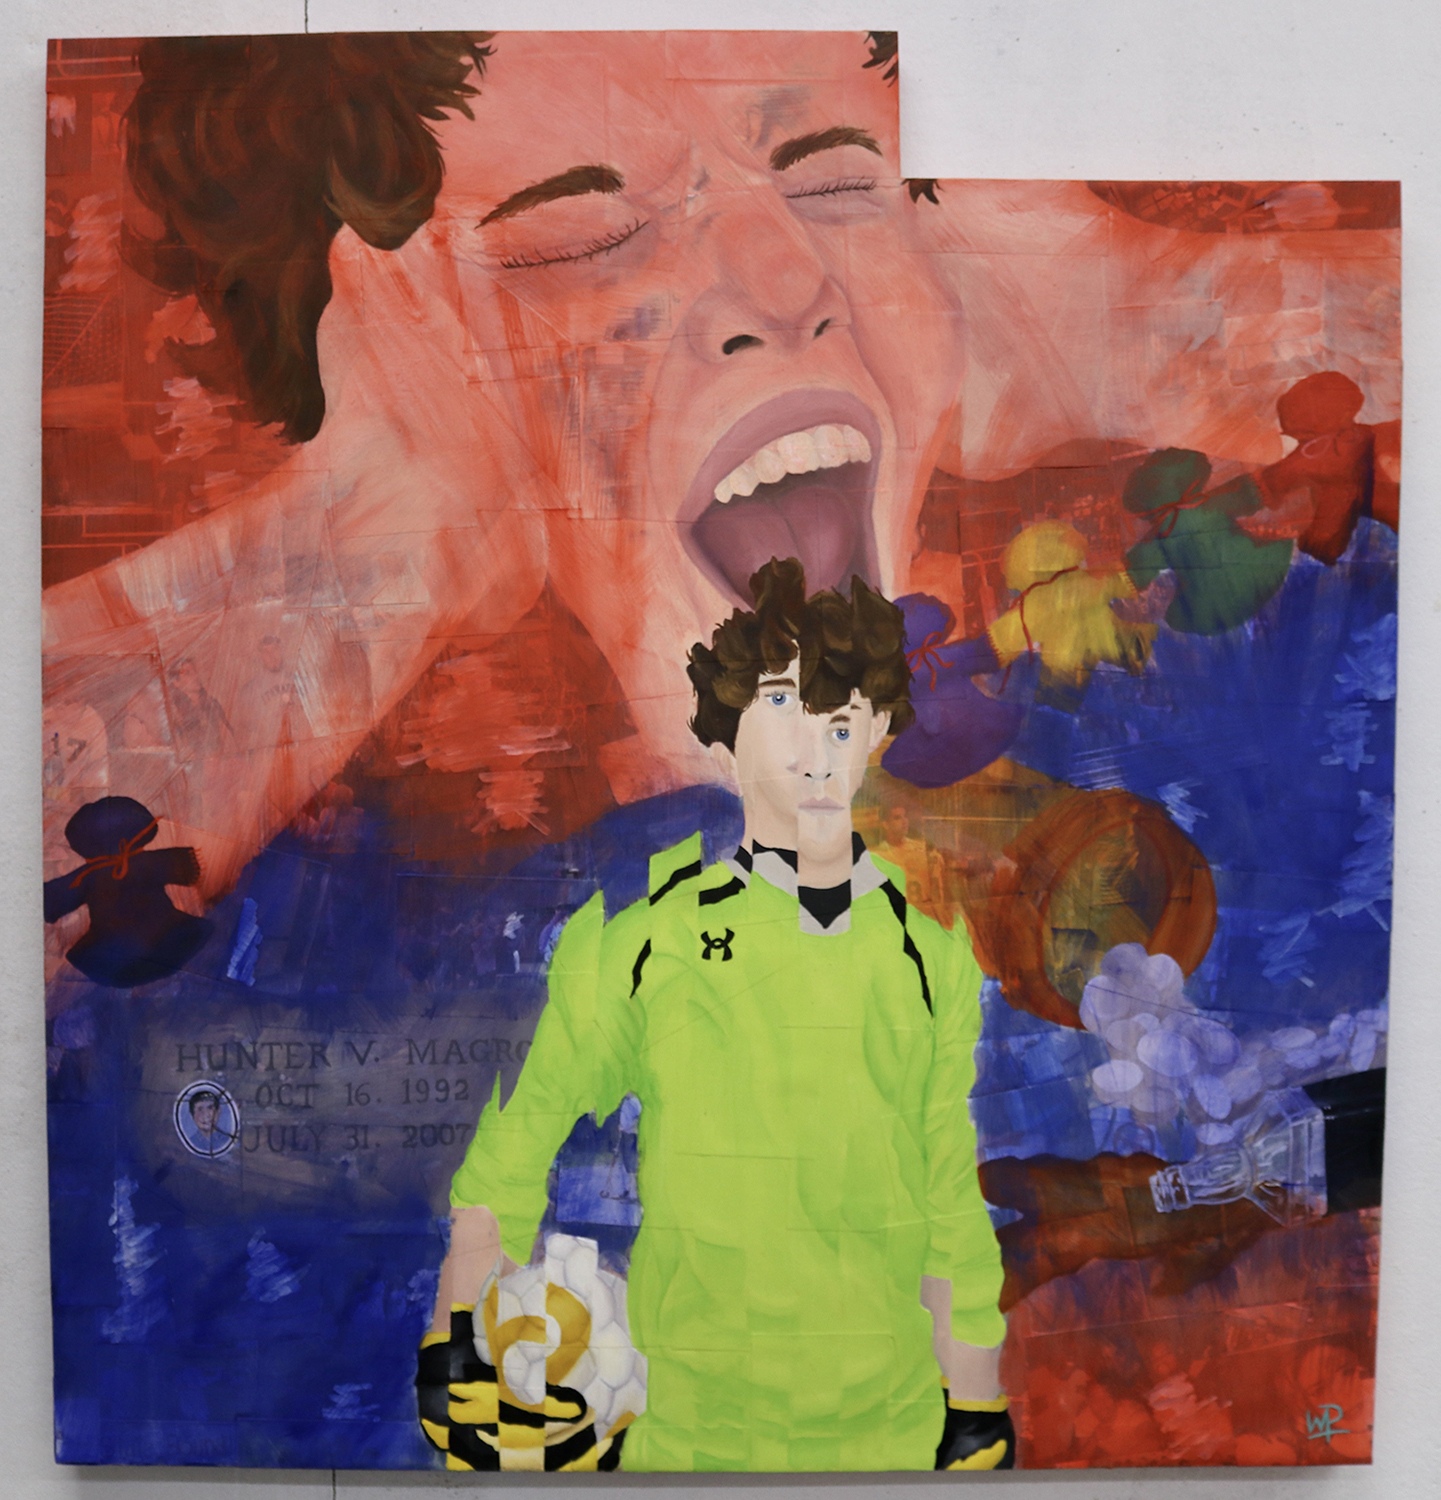 Collage portrait of young male in soccer goalie uniform with soccer ball with key moments indicating mental state collaged in background.